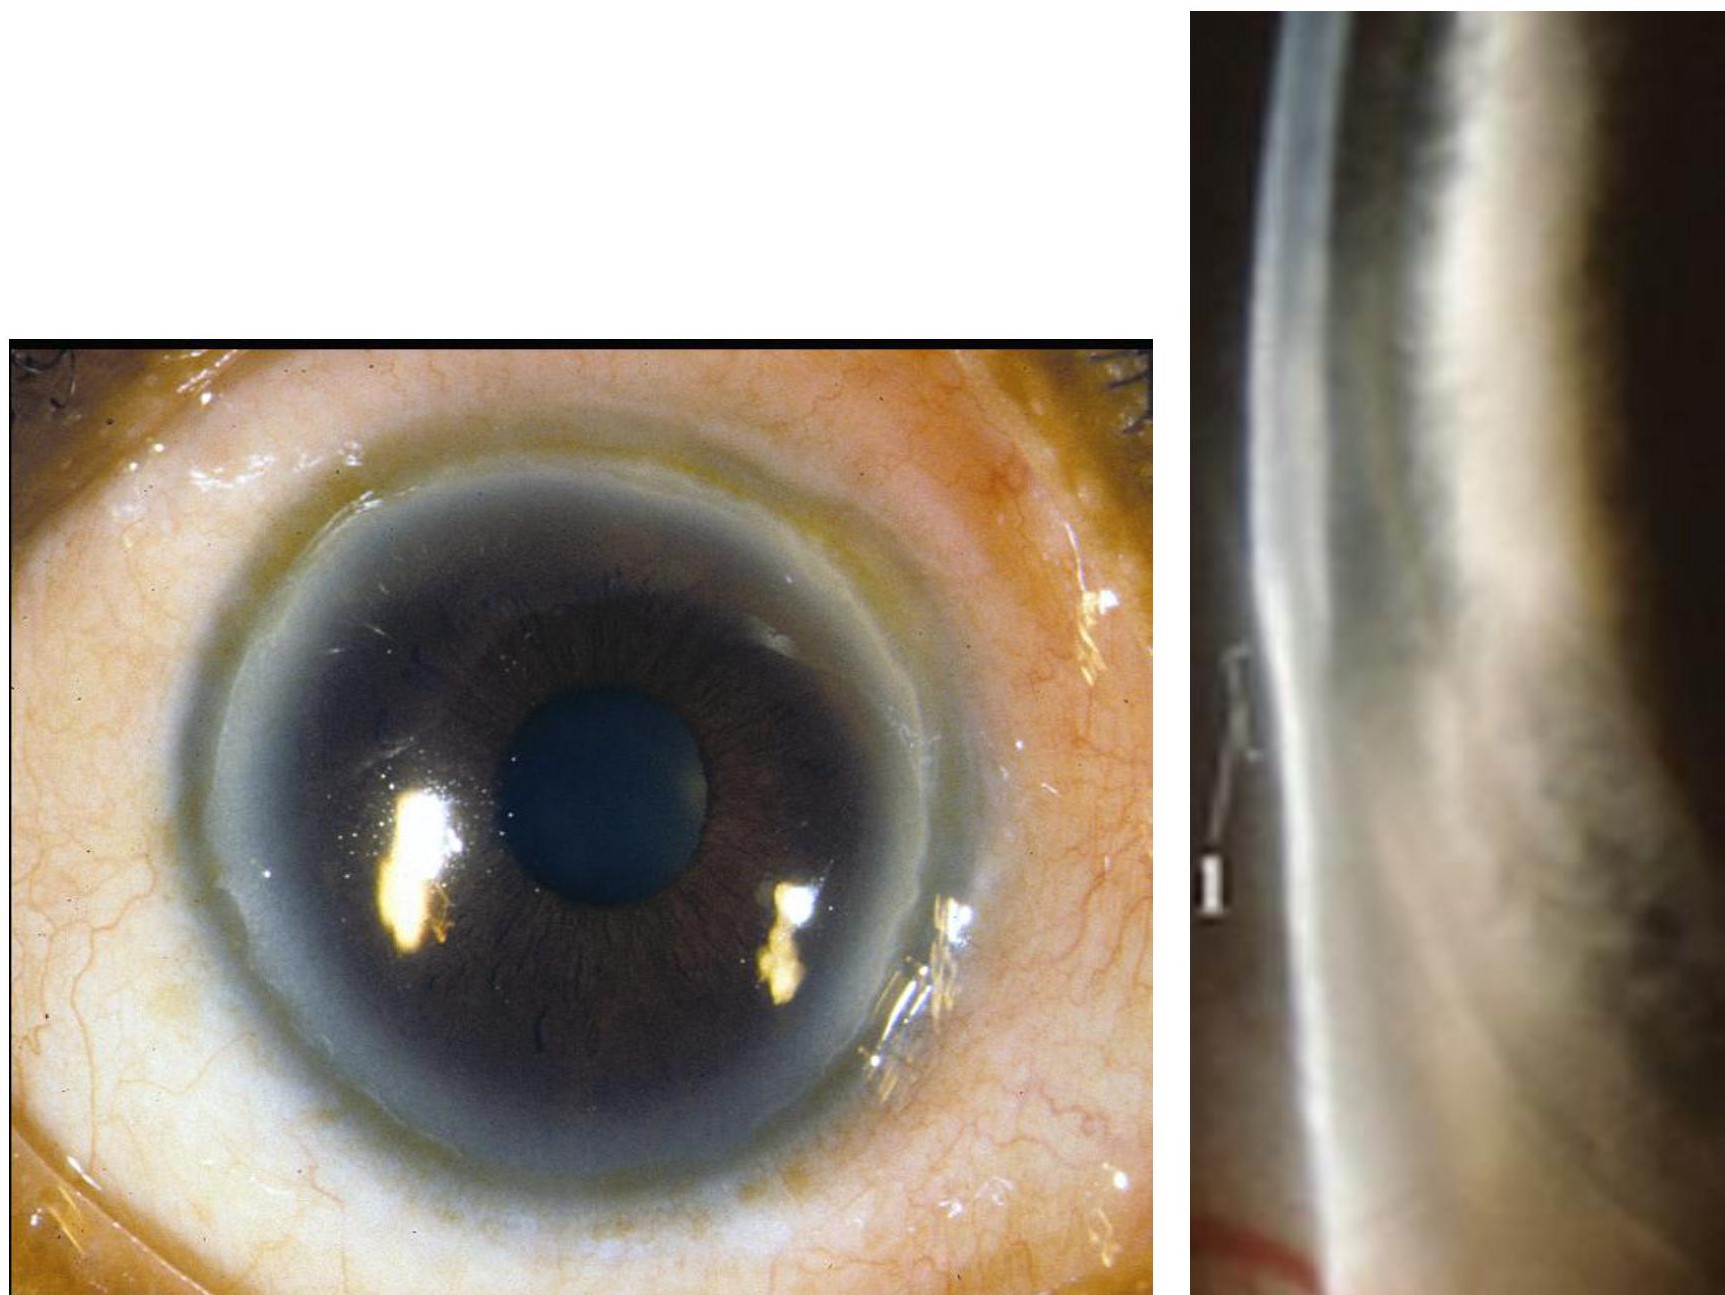 Figure 1: The images are showing peripheral corneal thinning on slit lamp examination in a patient with Furrow Degeneration.